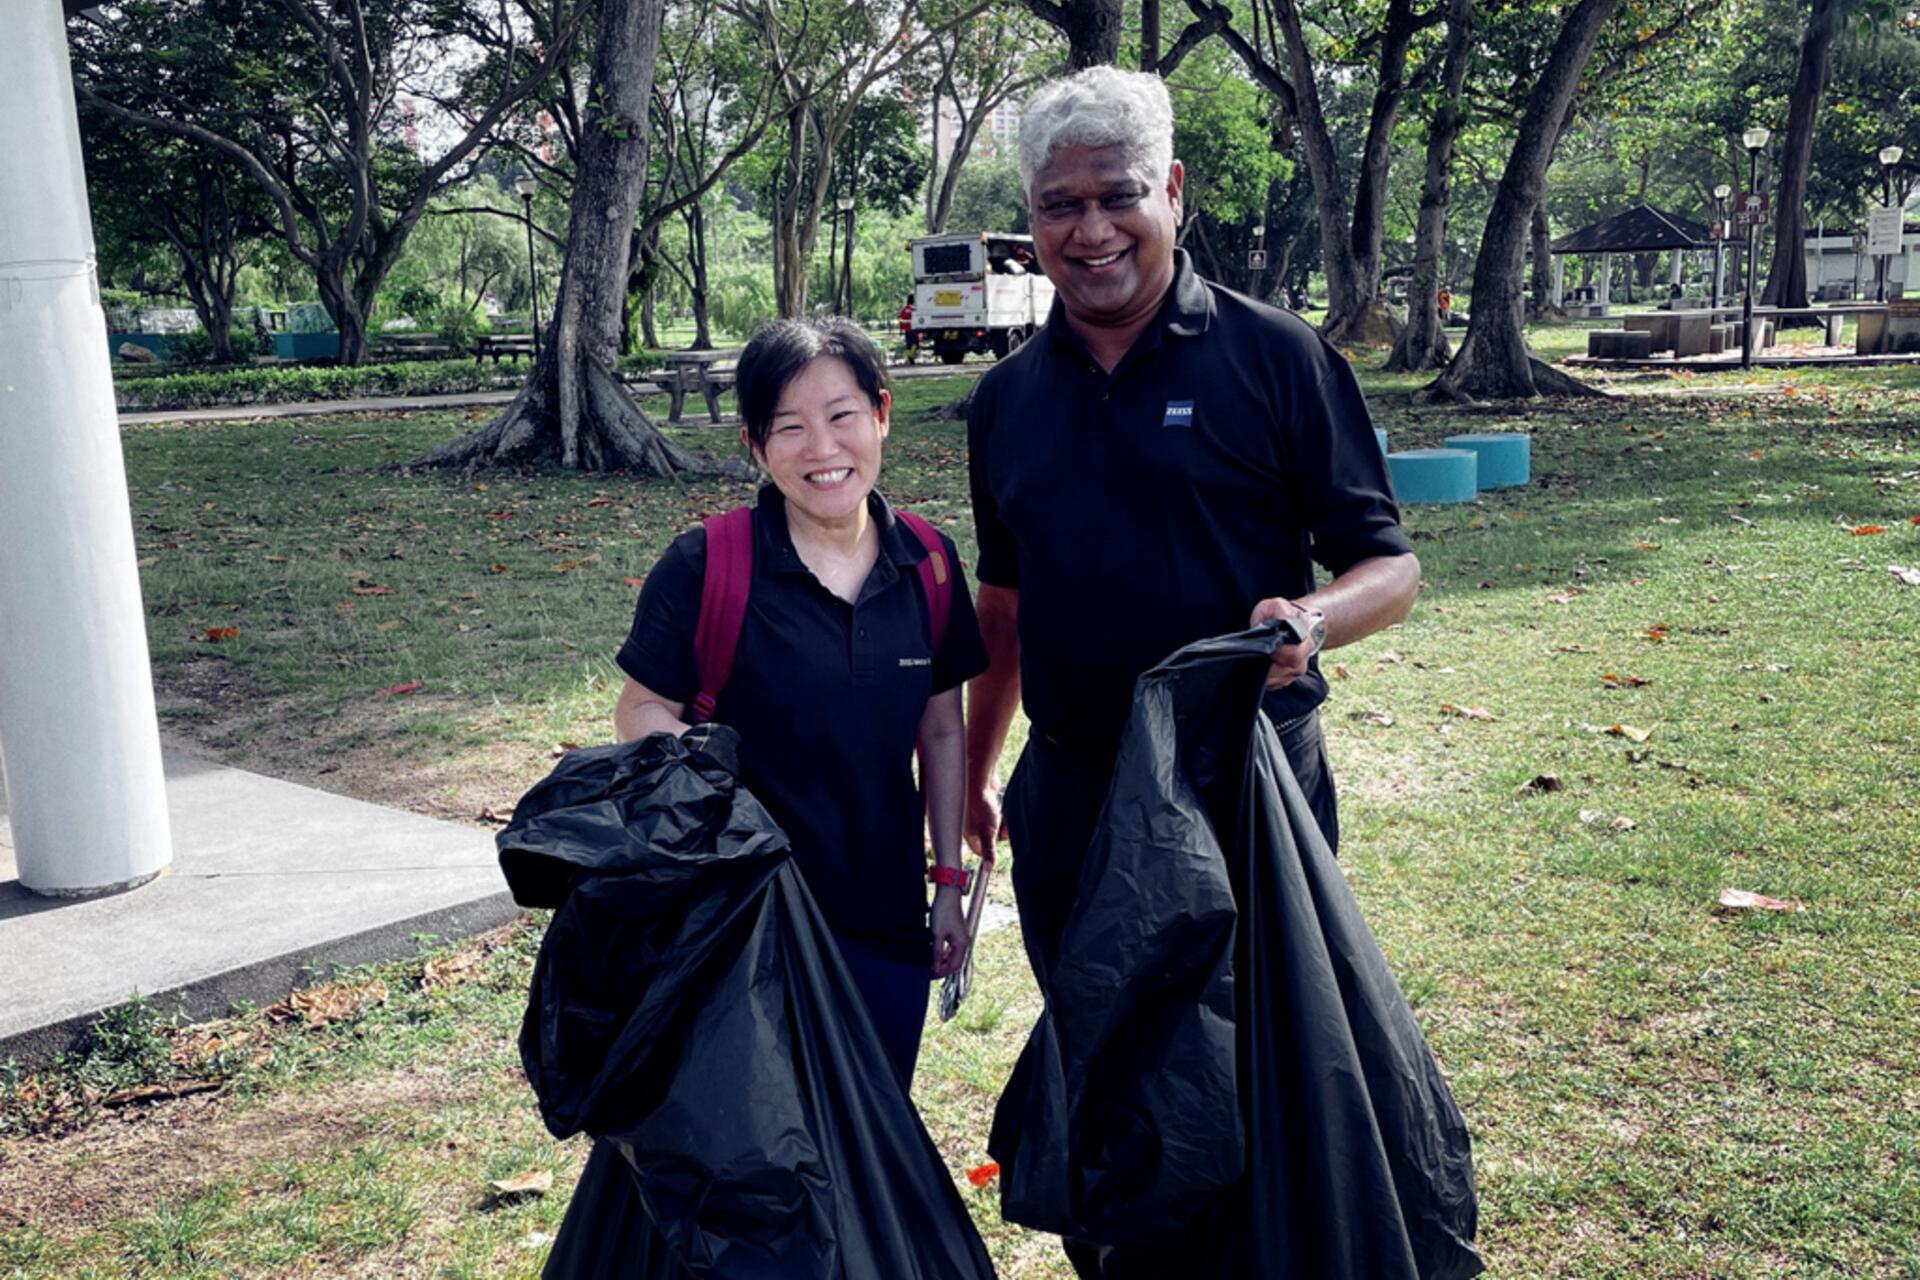 ZEISS employees in Singapore picking up litter on earth day